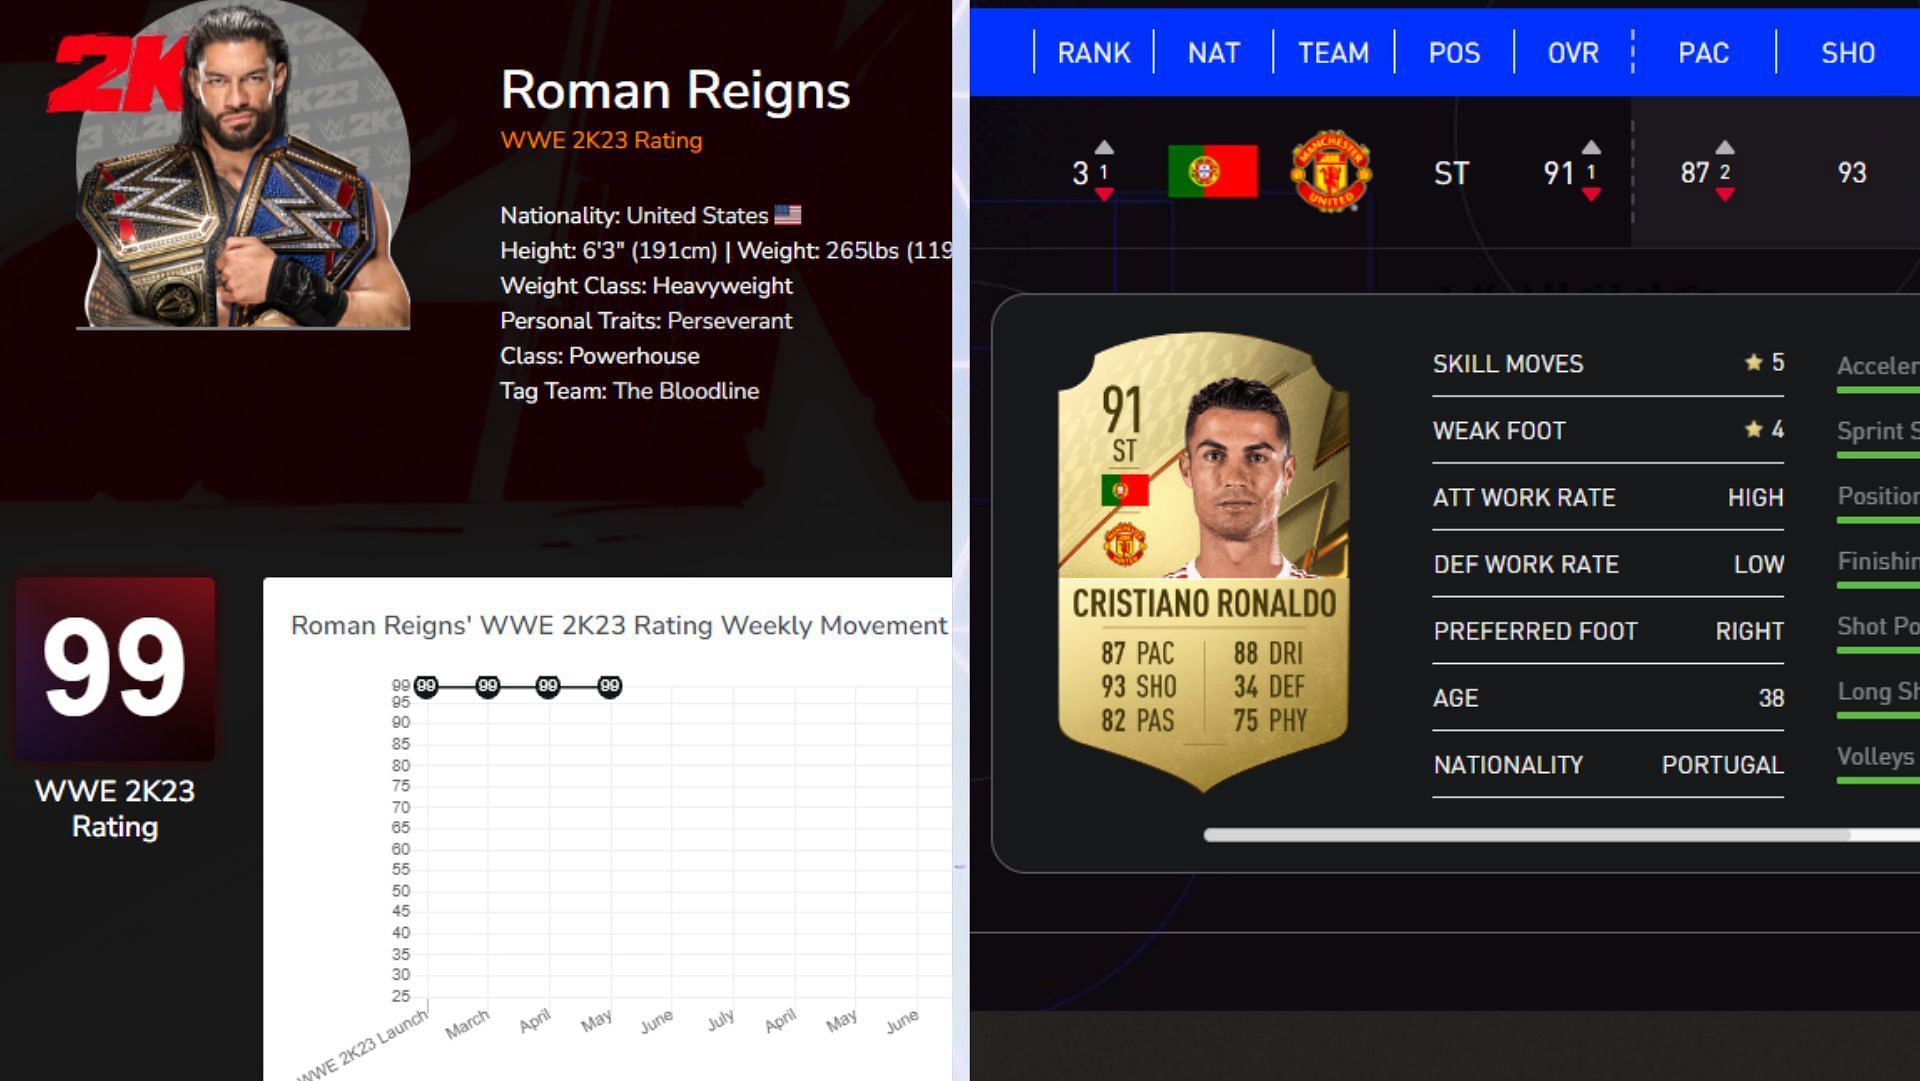 Ratings for Roman Reigns (2K23) and Cristiano Ronaldo (FIFA 2022)